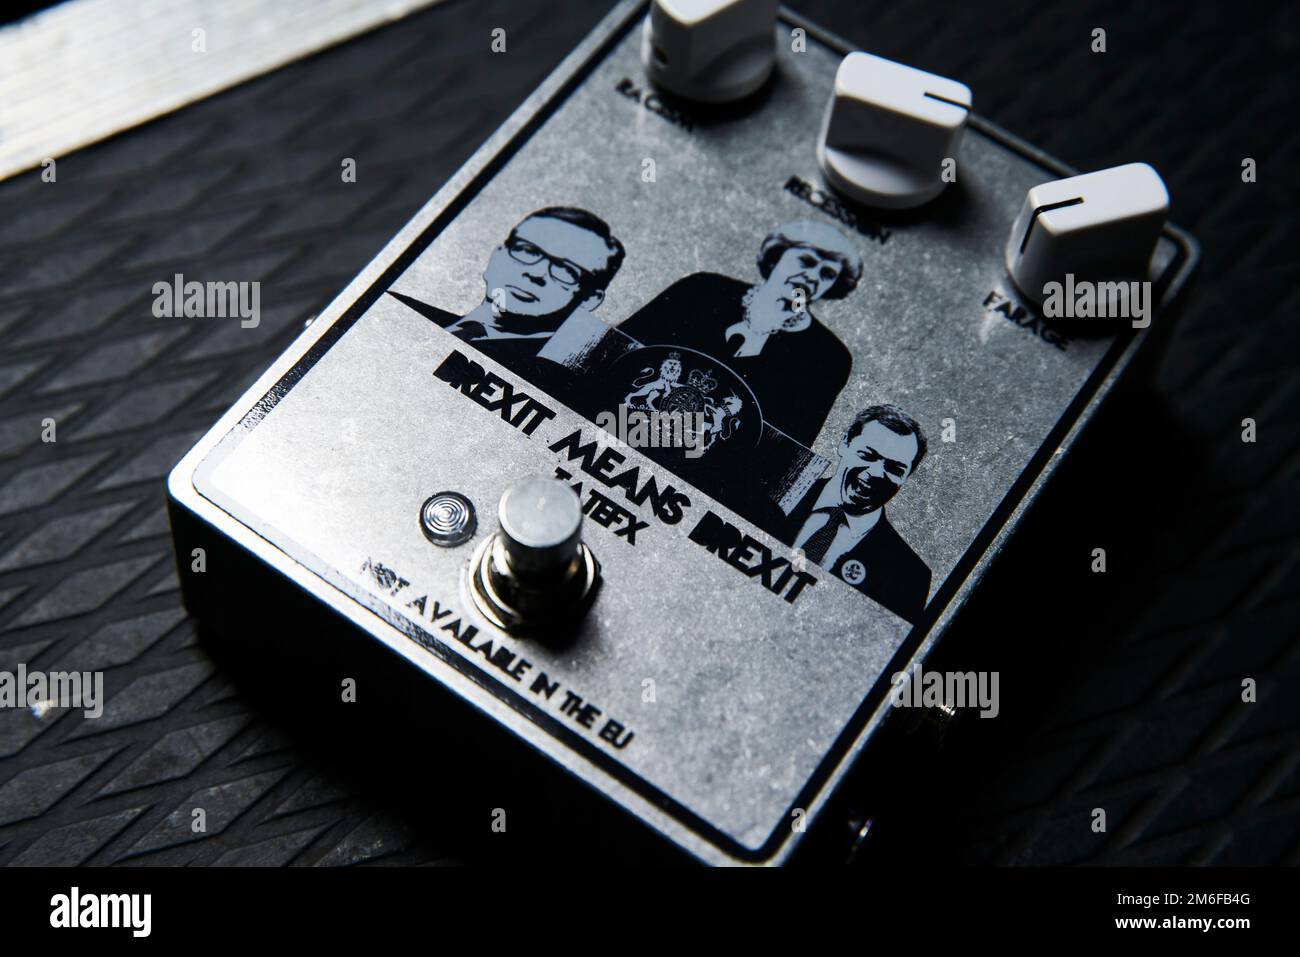 Mikey from Skindred's Brexit Means Brexit guitar effect pedal with images of Michael Gove, Theresa May, and Nigel Farage. Stock Photo